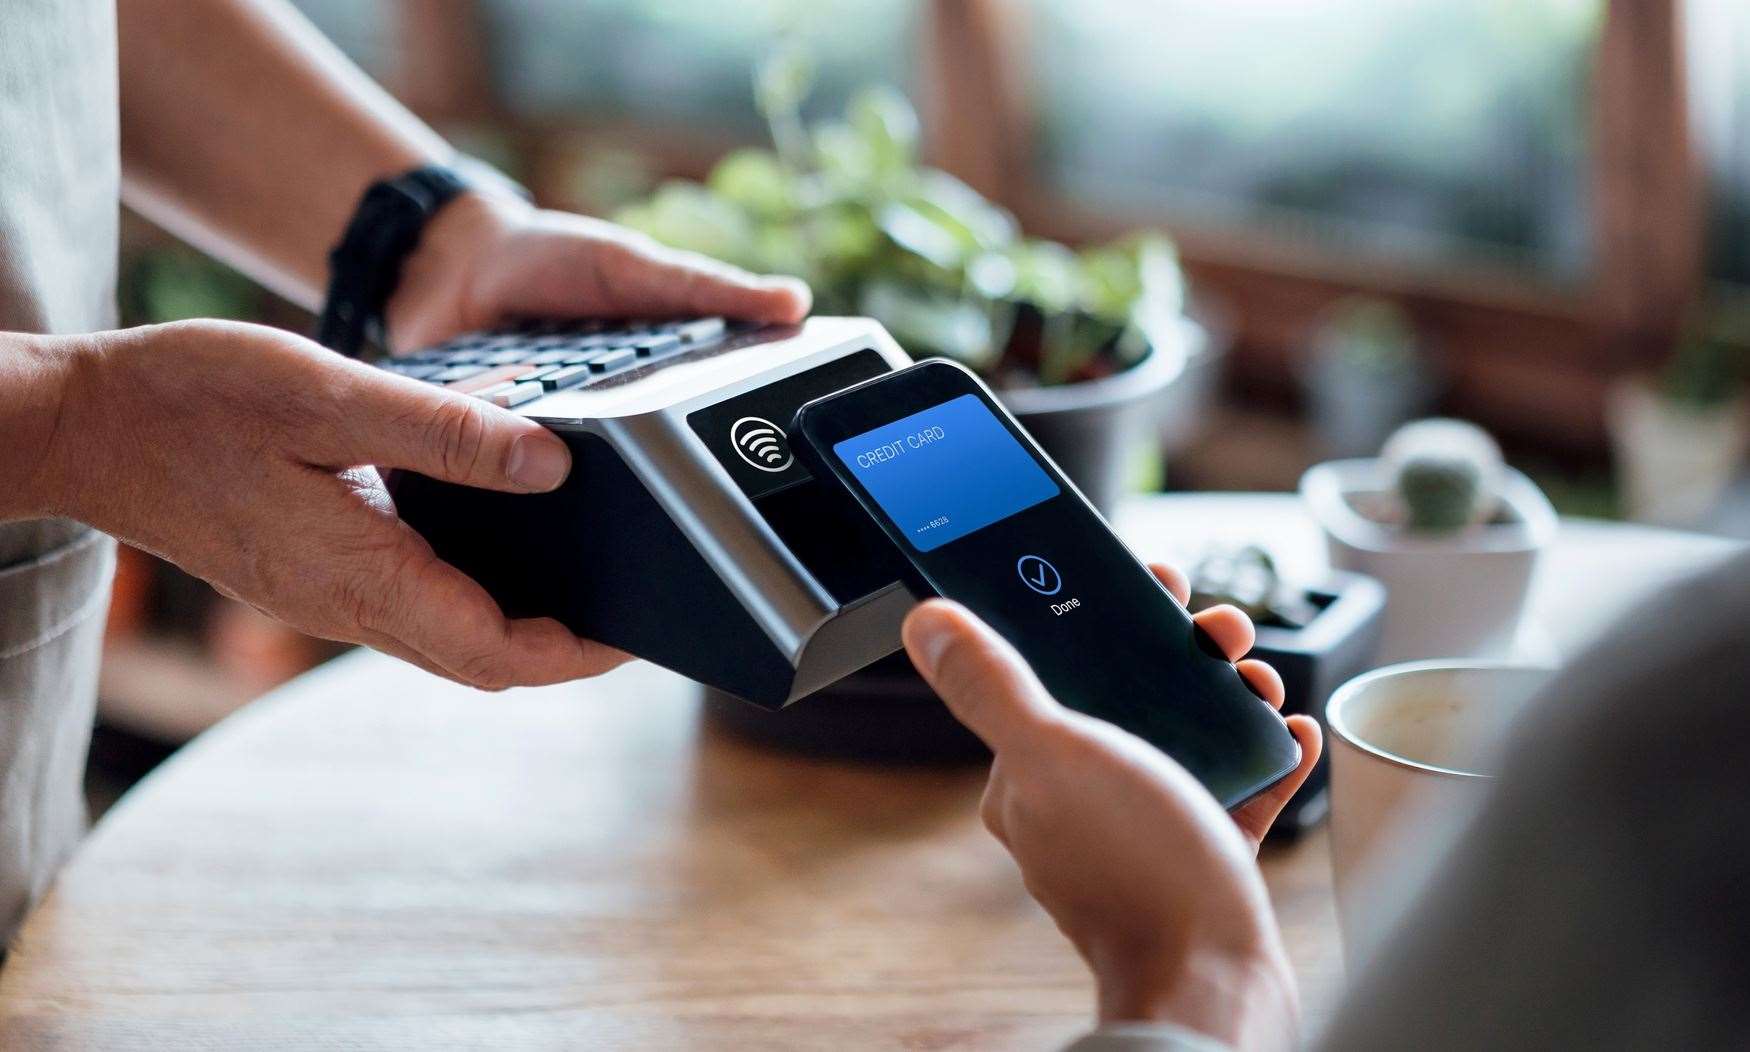 Going cashless is increasingly popular. Picture: iStock